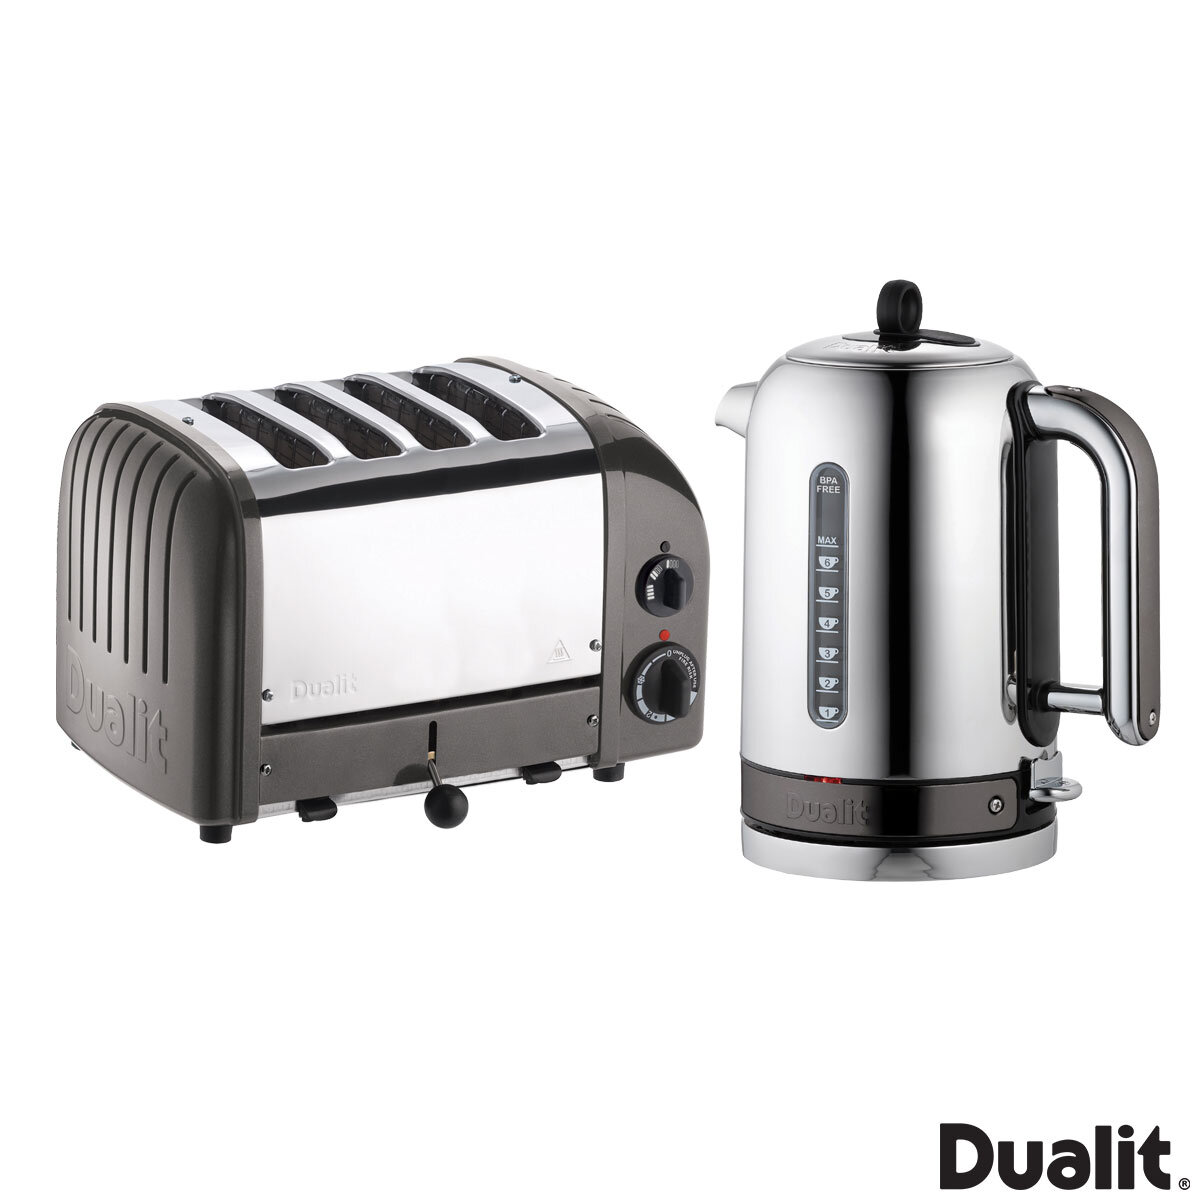 Dualit Classic 1.7L Kettle & 4 Slot Toaster Set in Charco...